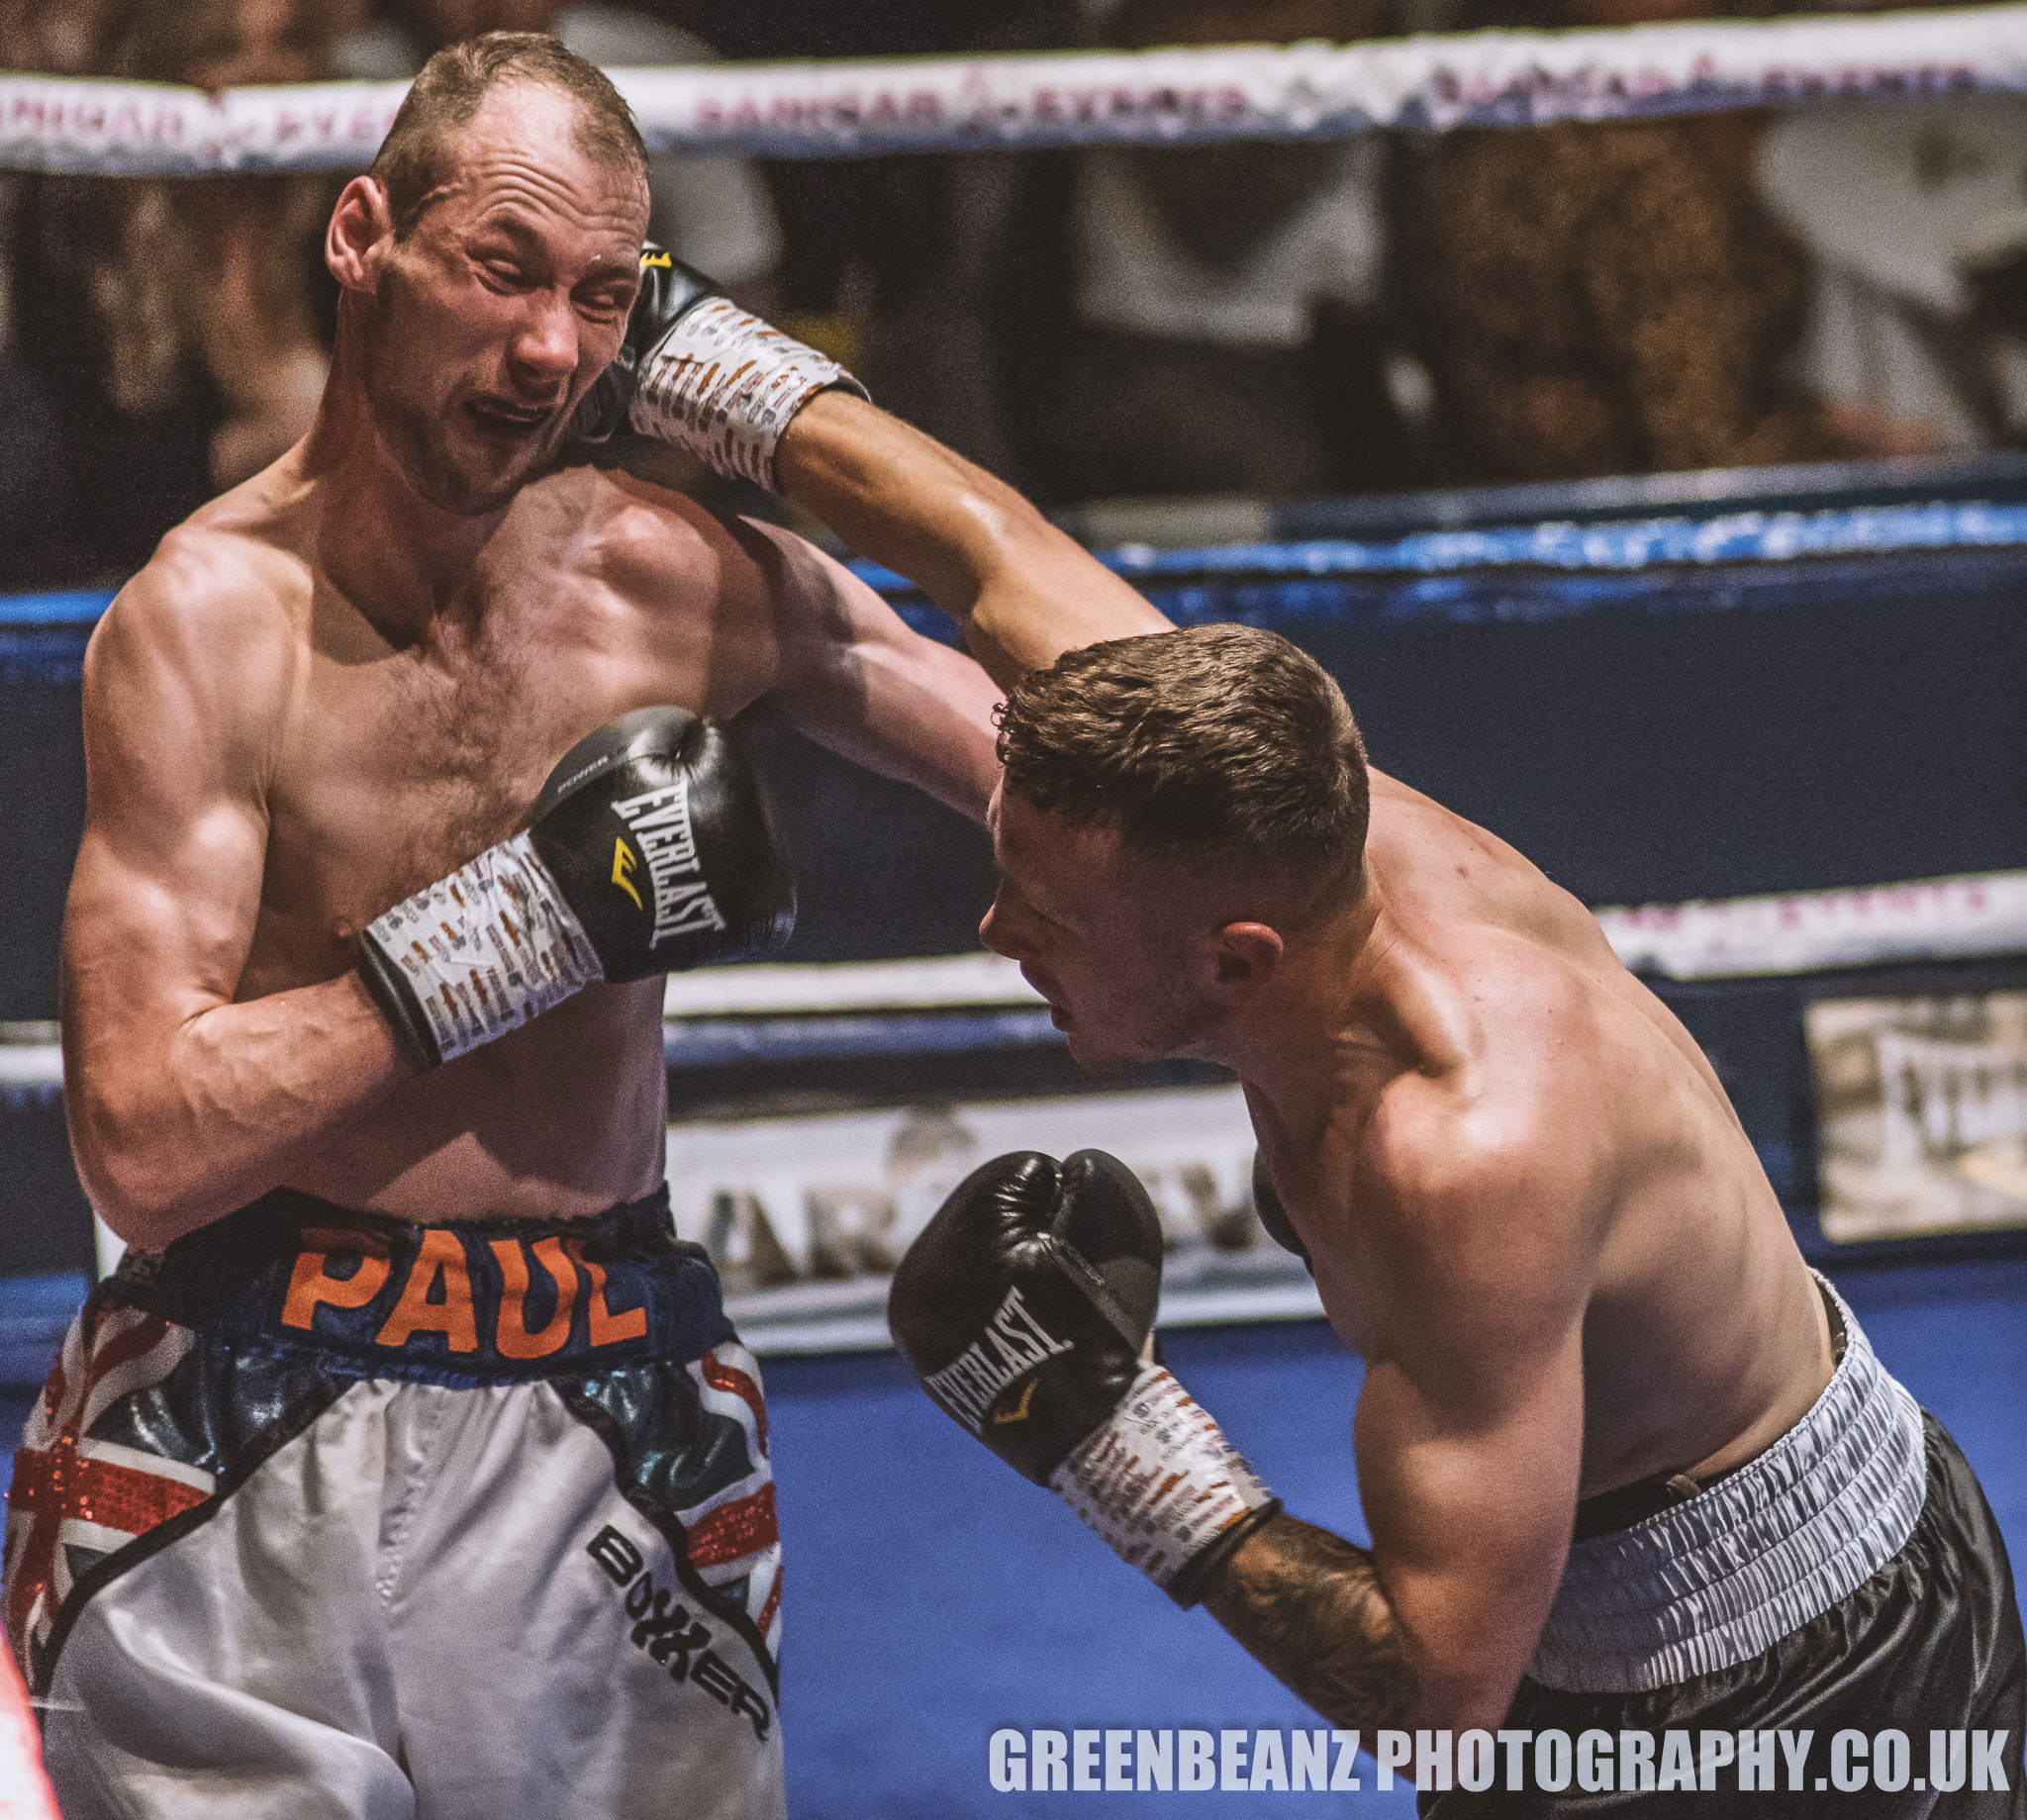 Boxer 'Sugar' Shane Medlin connects with Paul Cummings at Torquay in 2019